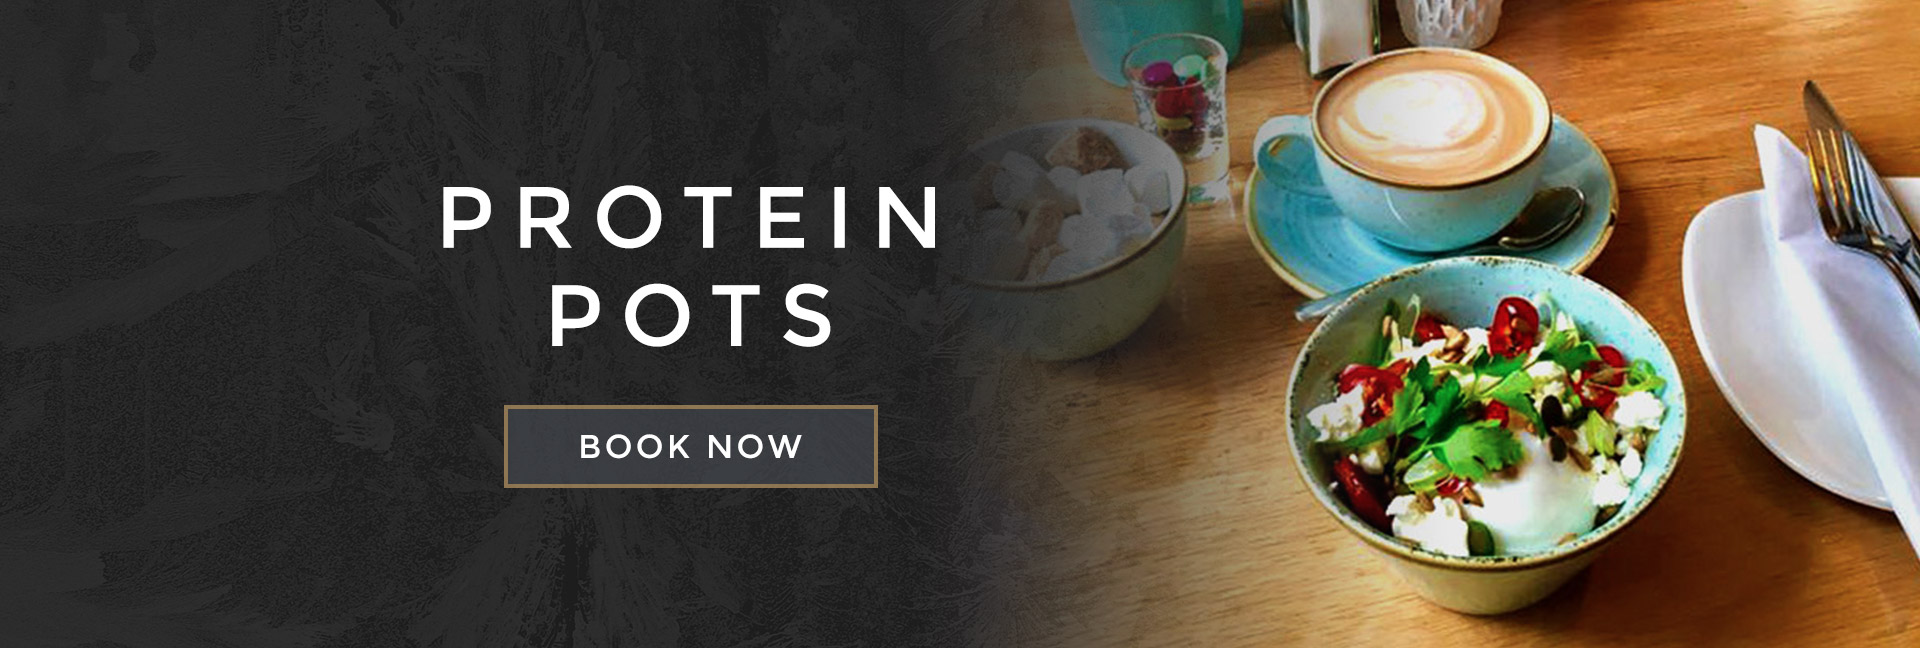 Protein pots at All Bar One Covent Garden - Book your table